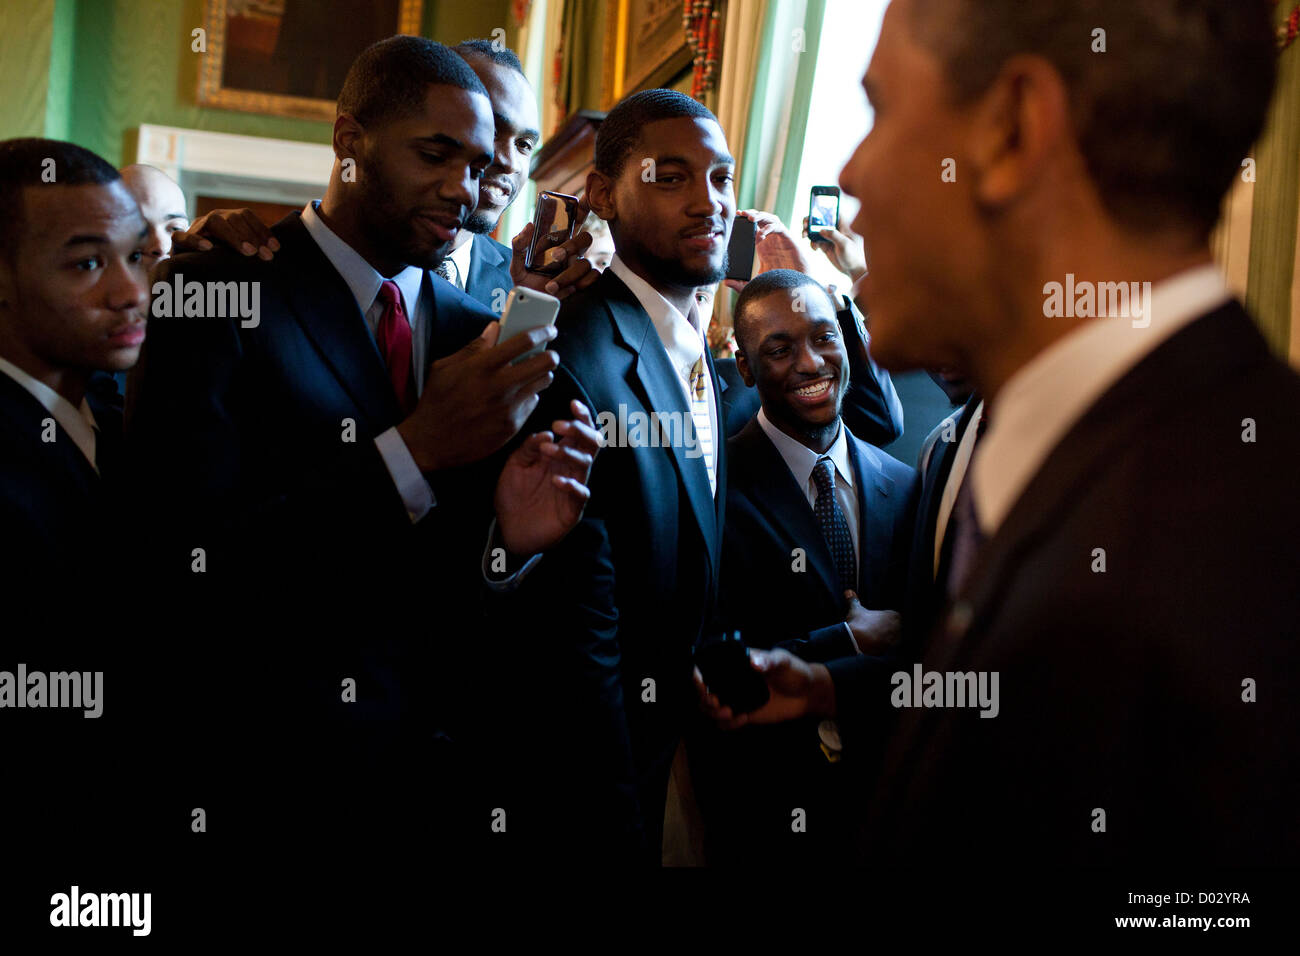 US President Barack Obama greets members of the University of Connecticut men's basketball team May 16, 2011 in the Green Room of the White House following an event celebrating the team's 2010 NCAA basketball championship. Stock Photo